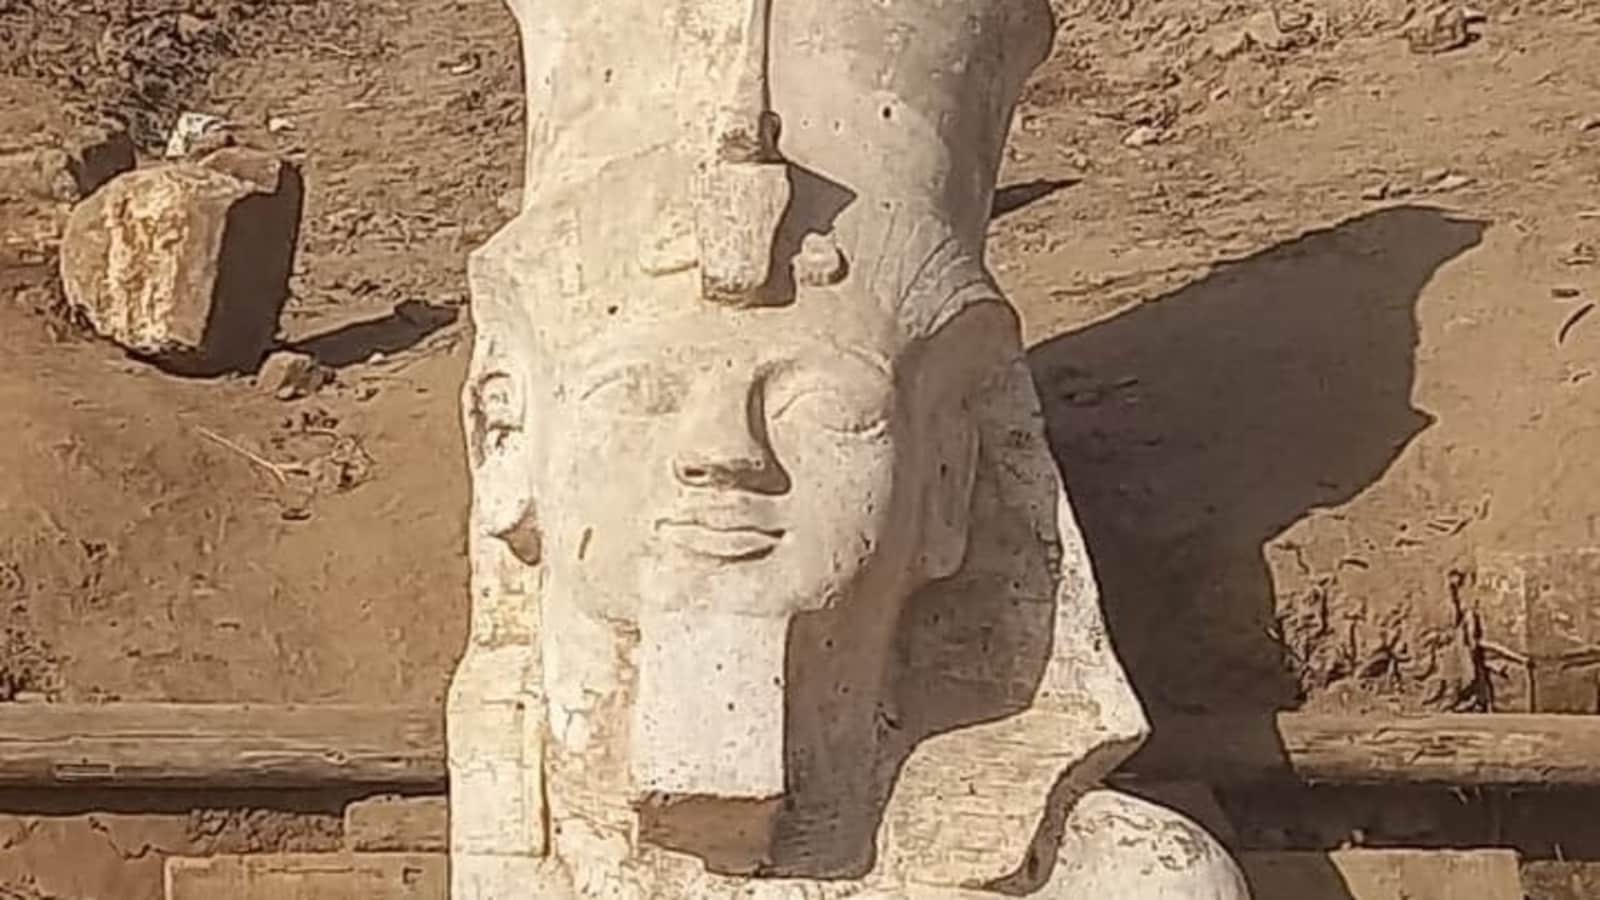 Egypt: Statue of Ramses II, third pharaoh of 19th Dynasty, discovered in Minya sands